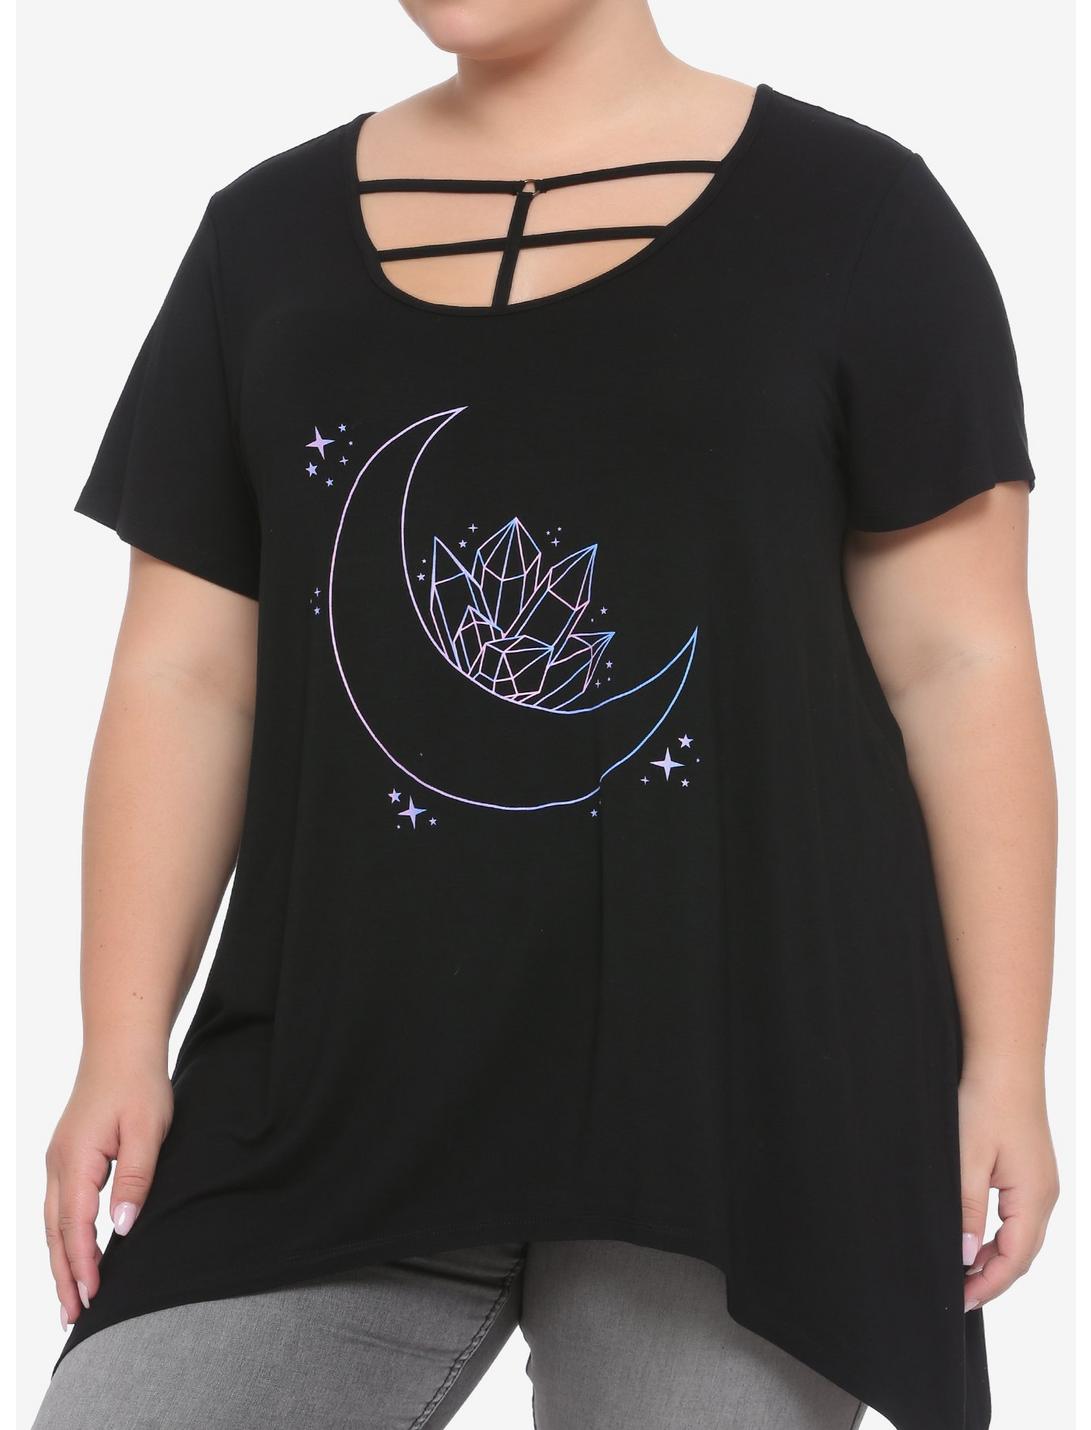 Moon Crystals Shark Bite Strappy Girls Top Plus Size, BLACK, hi-res